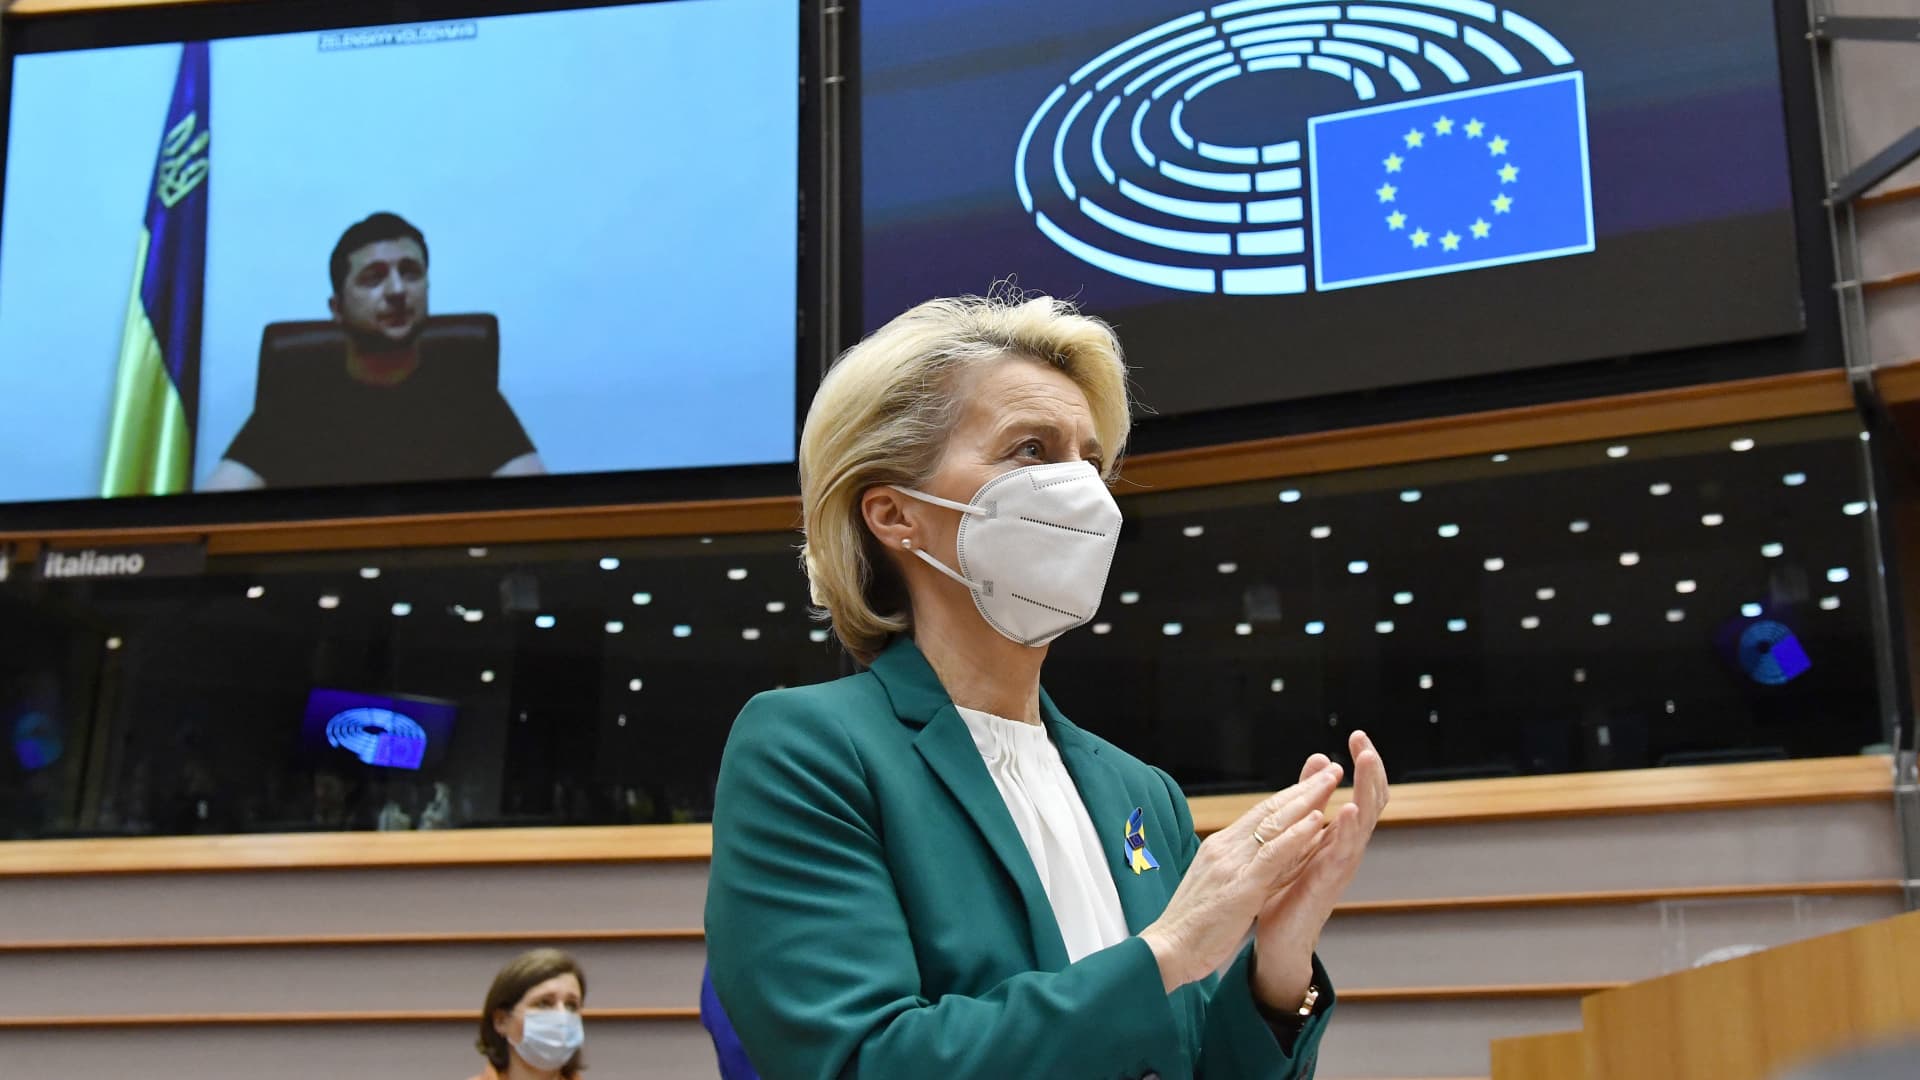 European Commission President Ursula von der Leyen applauds Ukrainian President Volodymyr Zelenskyy, who speaks in a video conference during a special plenary session of the European Parliament at the EU headquarters in Brussels on March 1, 2022.